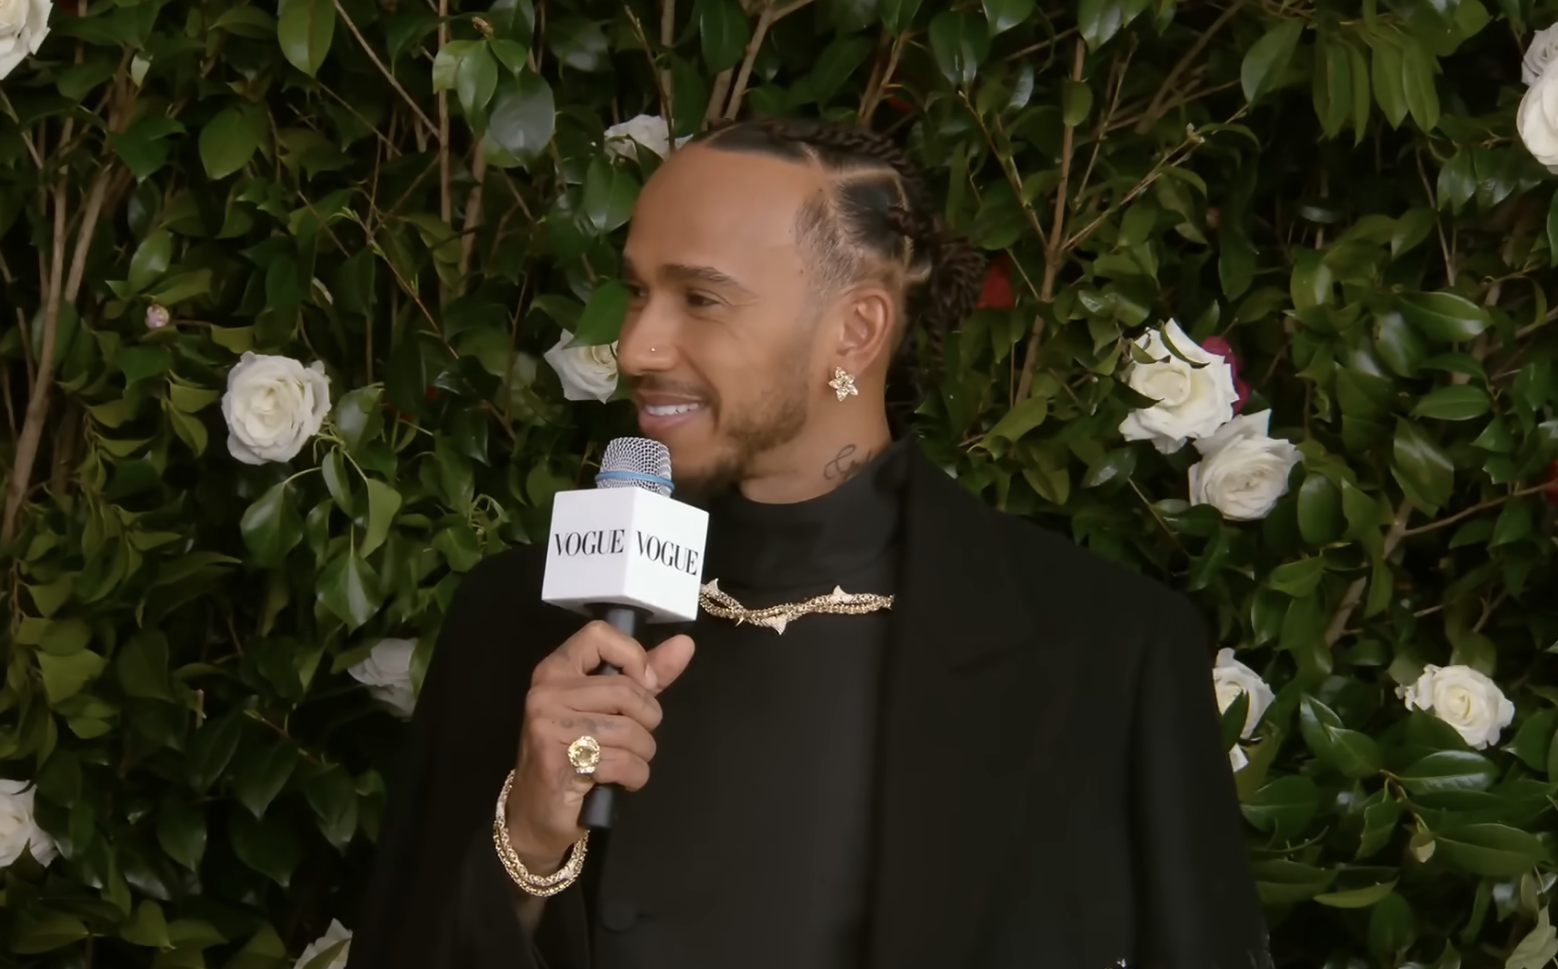 Lewis Hamilton in a black suit with jewelry, holding a mic, interview backdrop